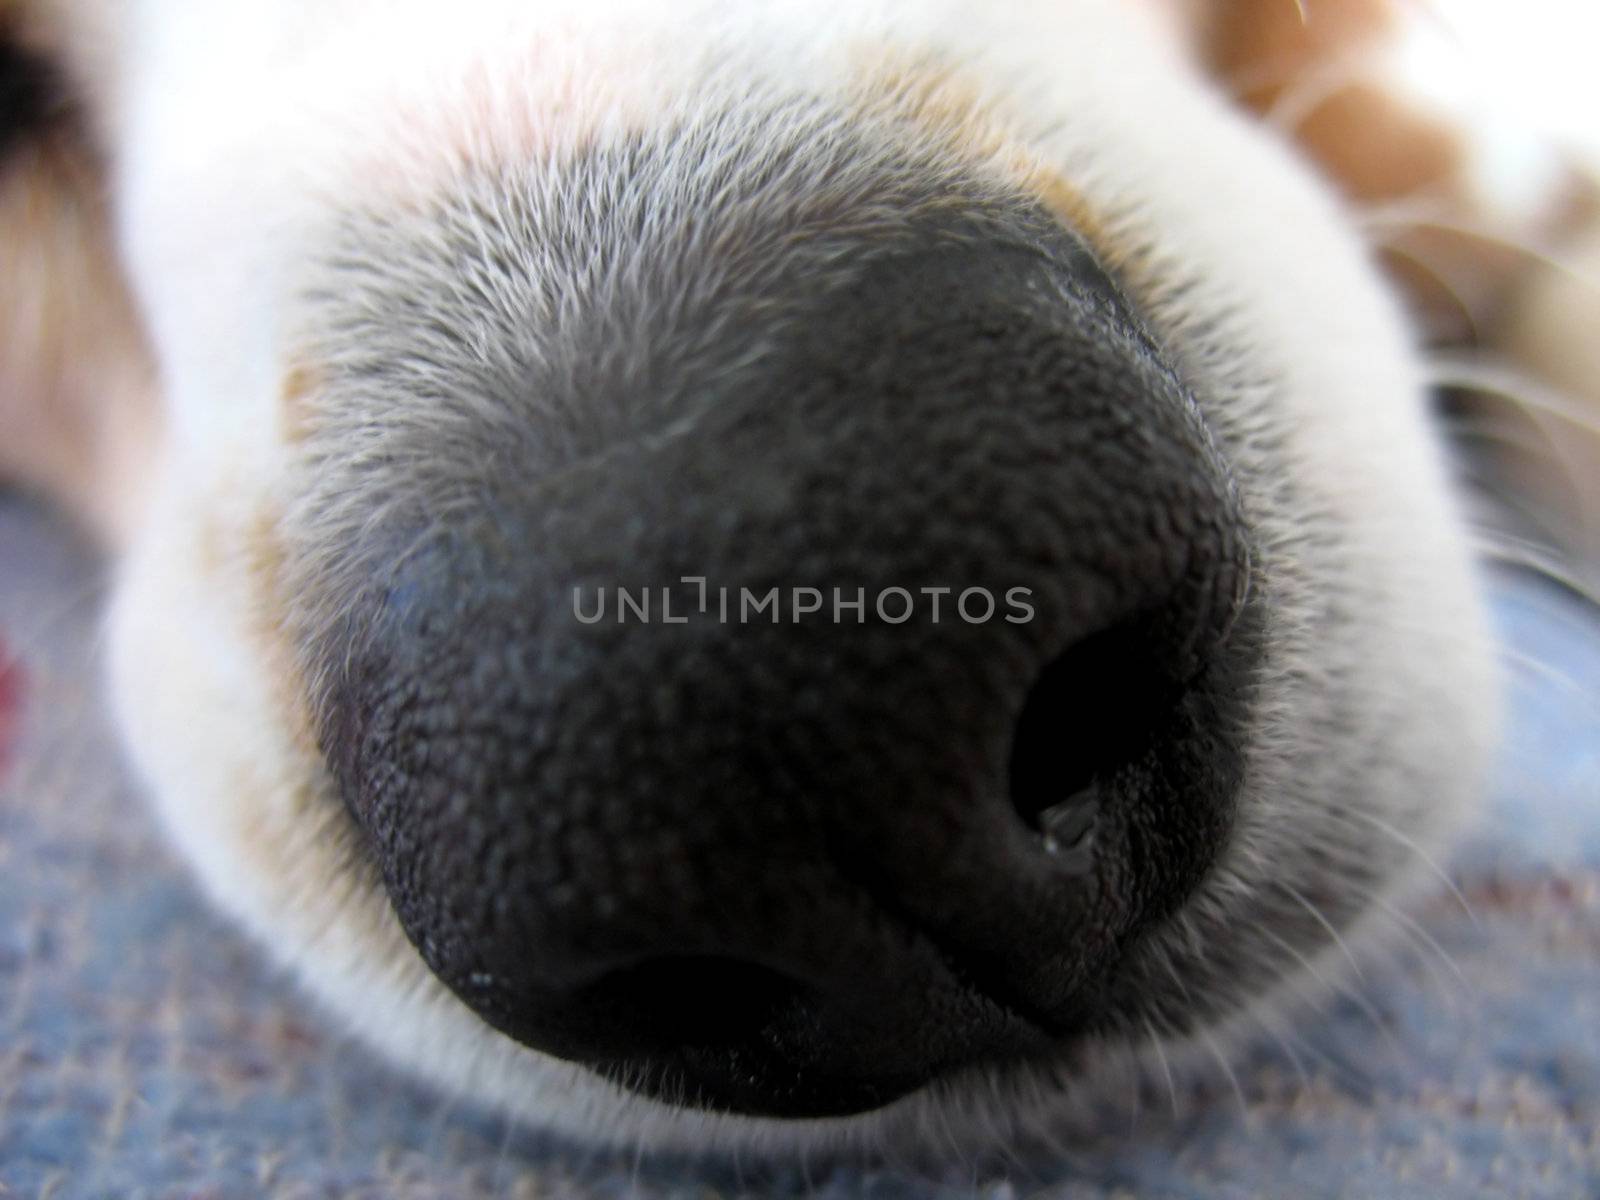 Beagle Nose Macro by graficallyminded